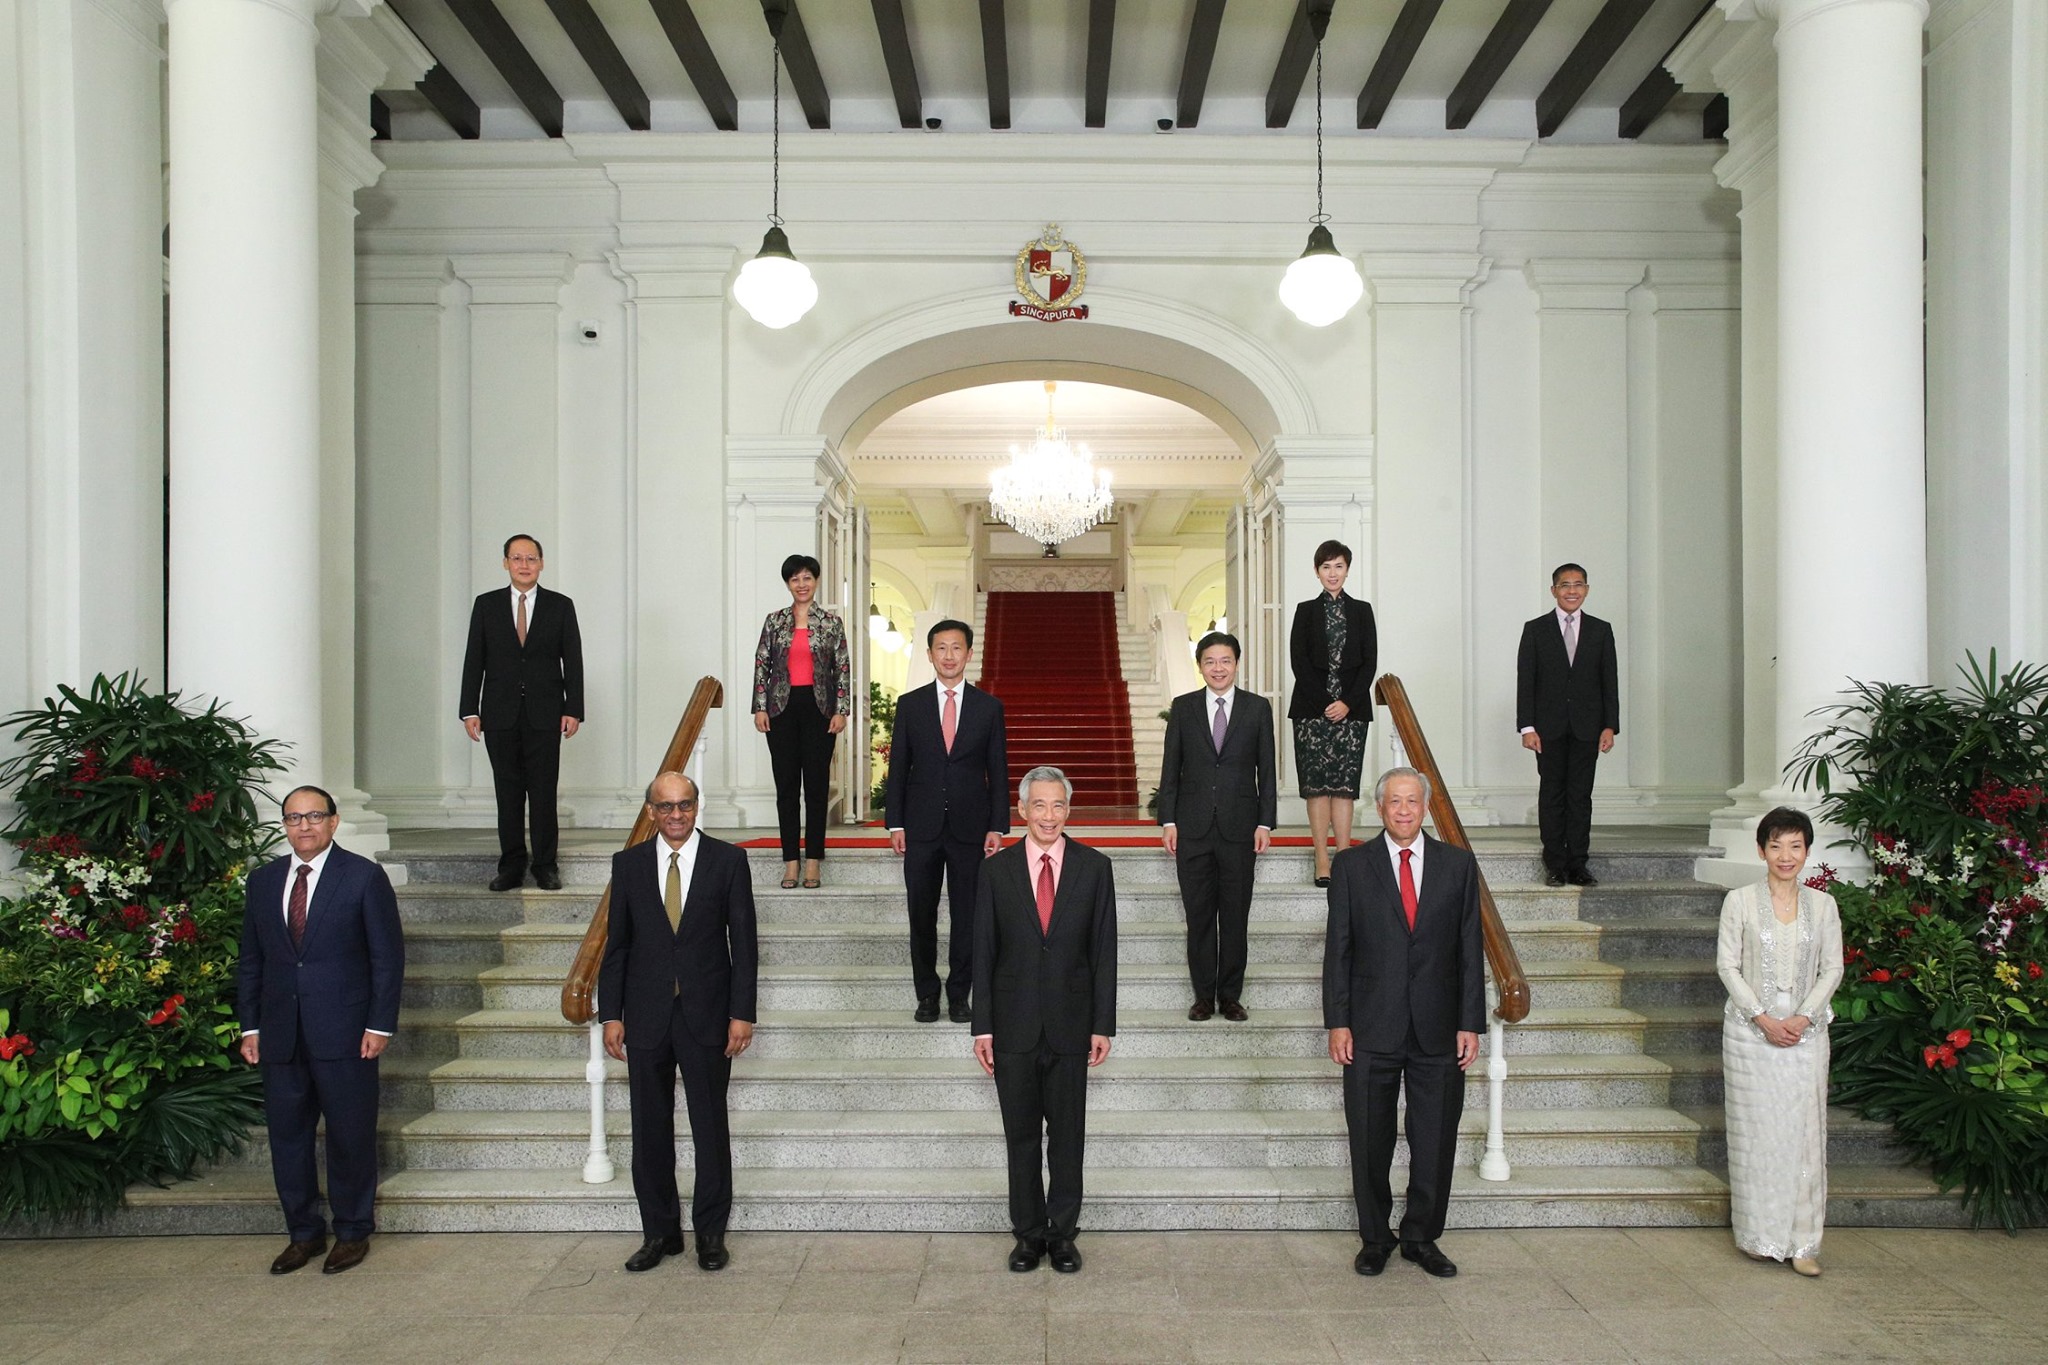 Half of the cabinet at the Istana. Photo: Lee Hsien Loong/Facebook
